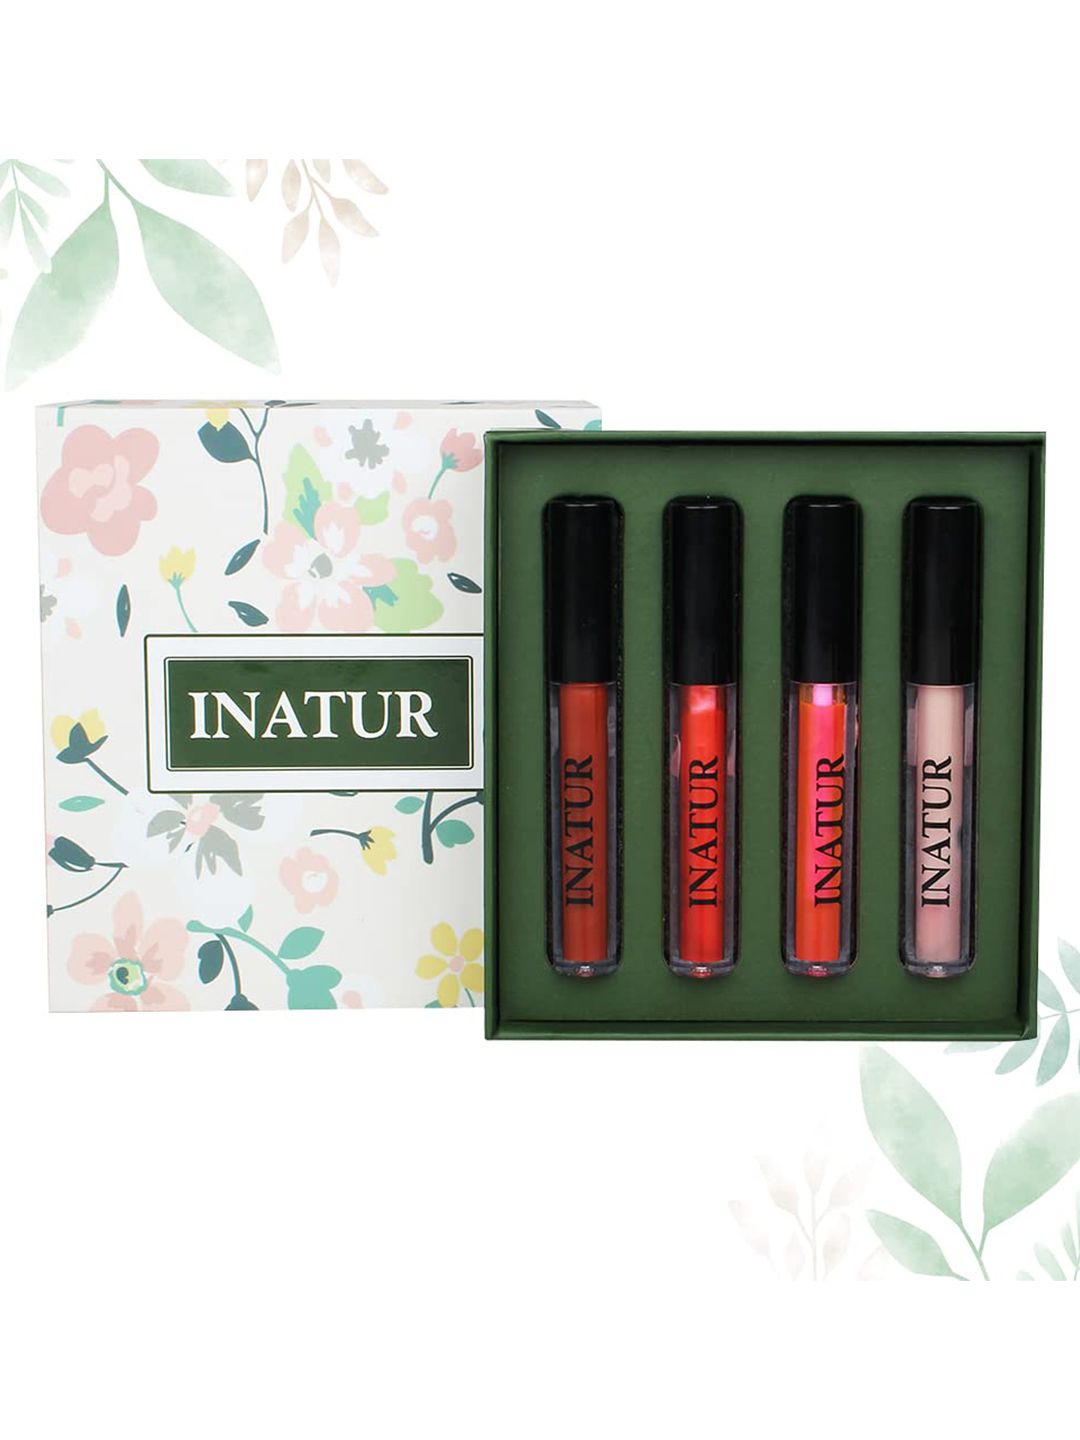 Inatur Set of 4 Lip Gloss - Attitude L4, Glam Pink L5, Cheeky Red L7 & Angelic L2 Price in India